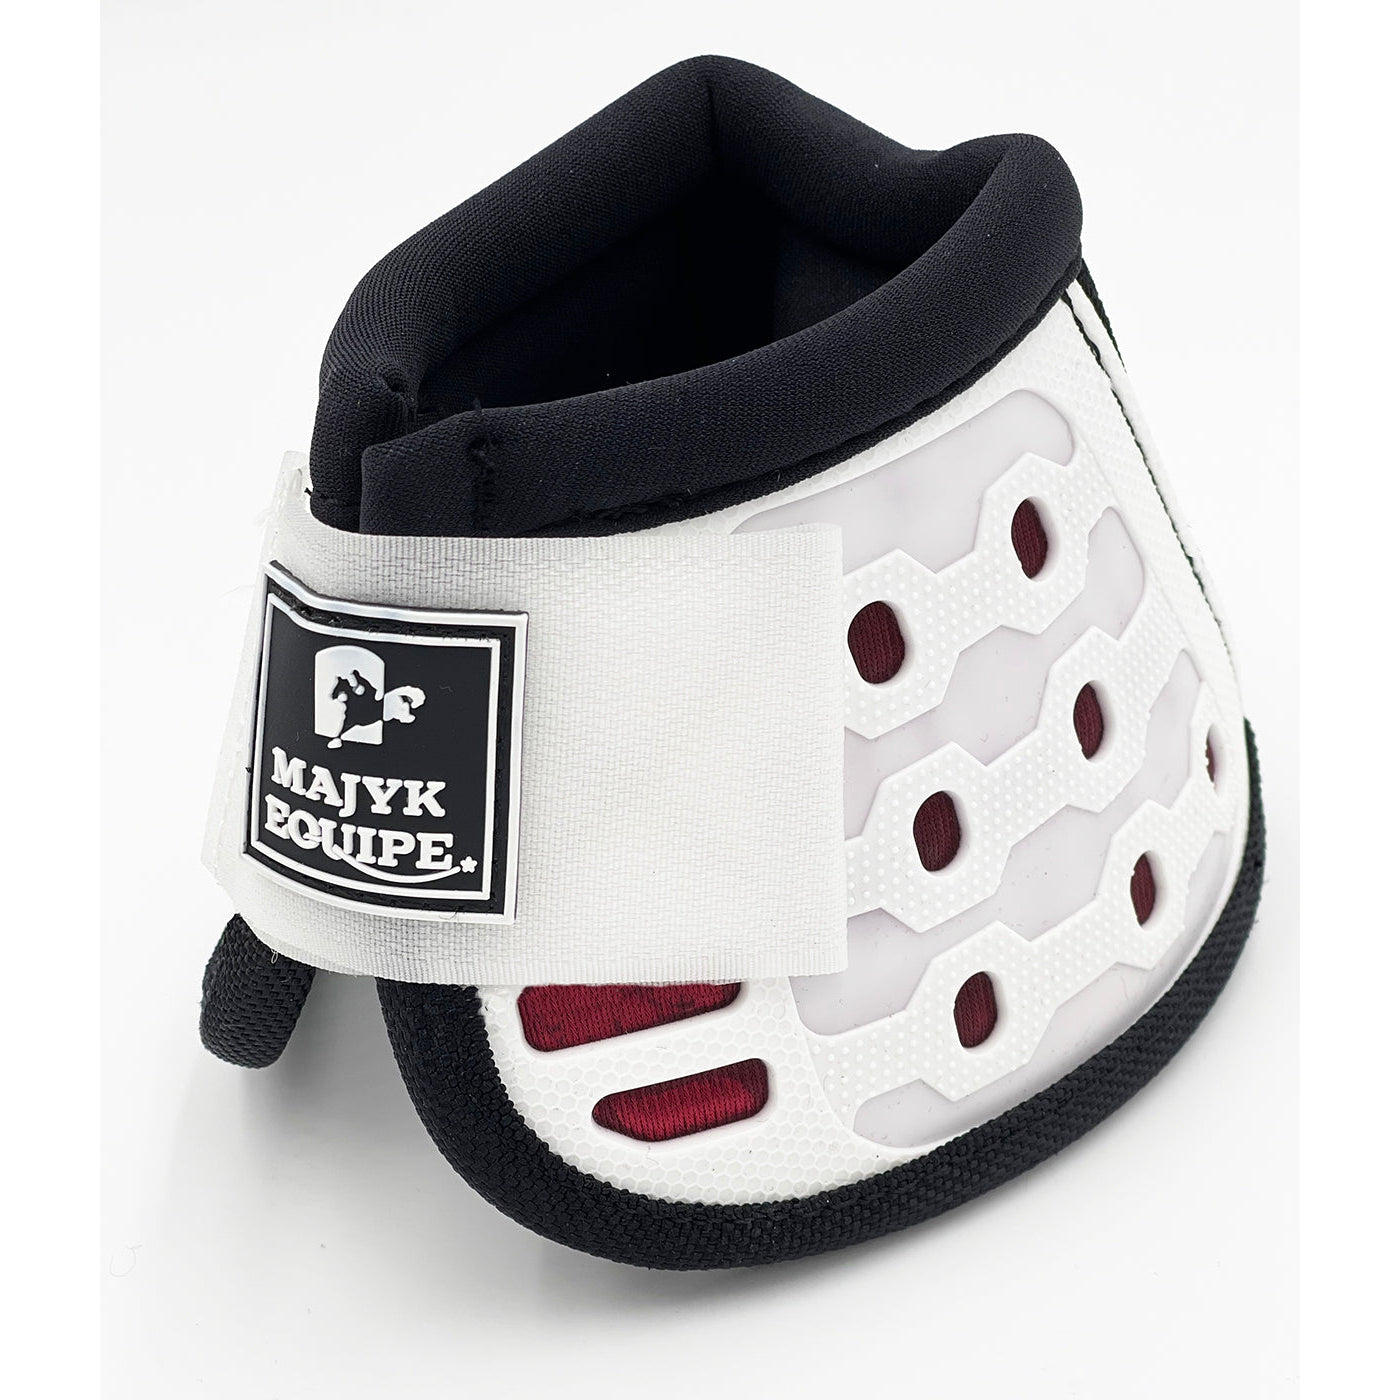 Special Edition Bell Boots - Limited Time Only! All New Navy/Silver and White/Bordeaux - Majyk Equipe